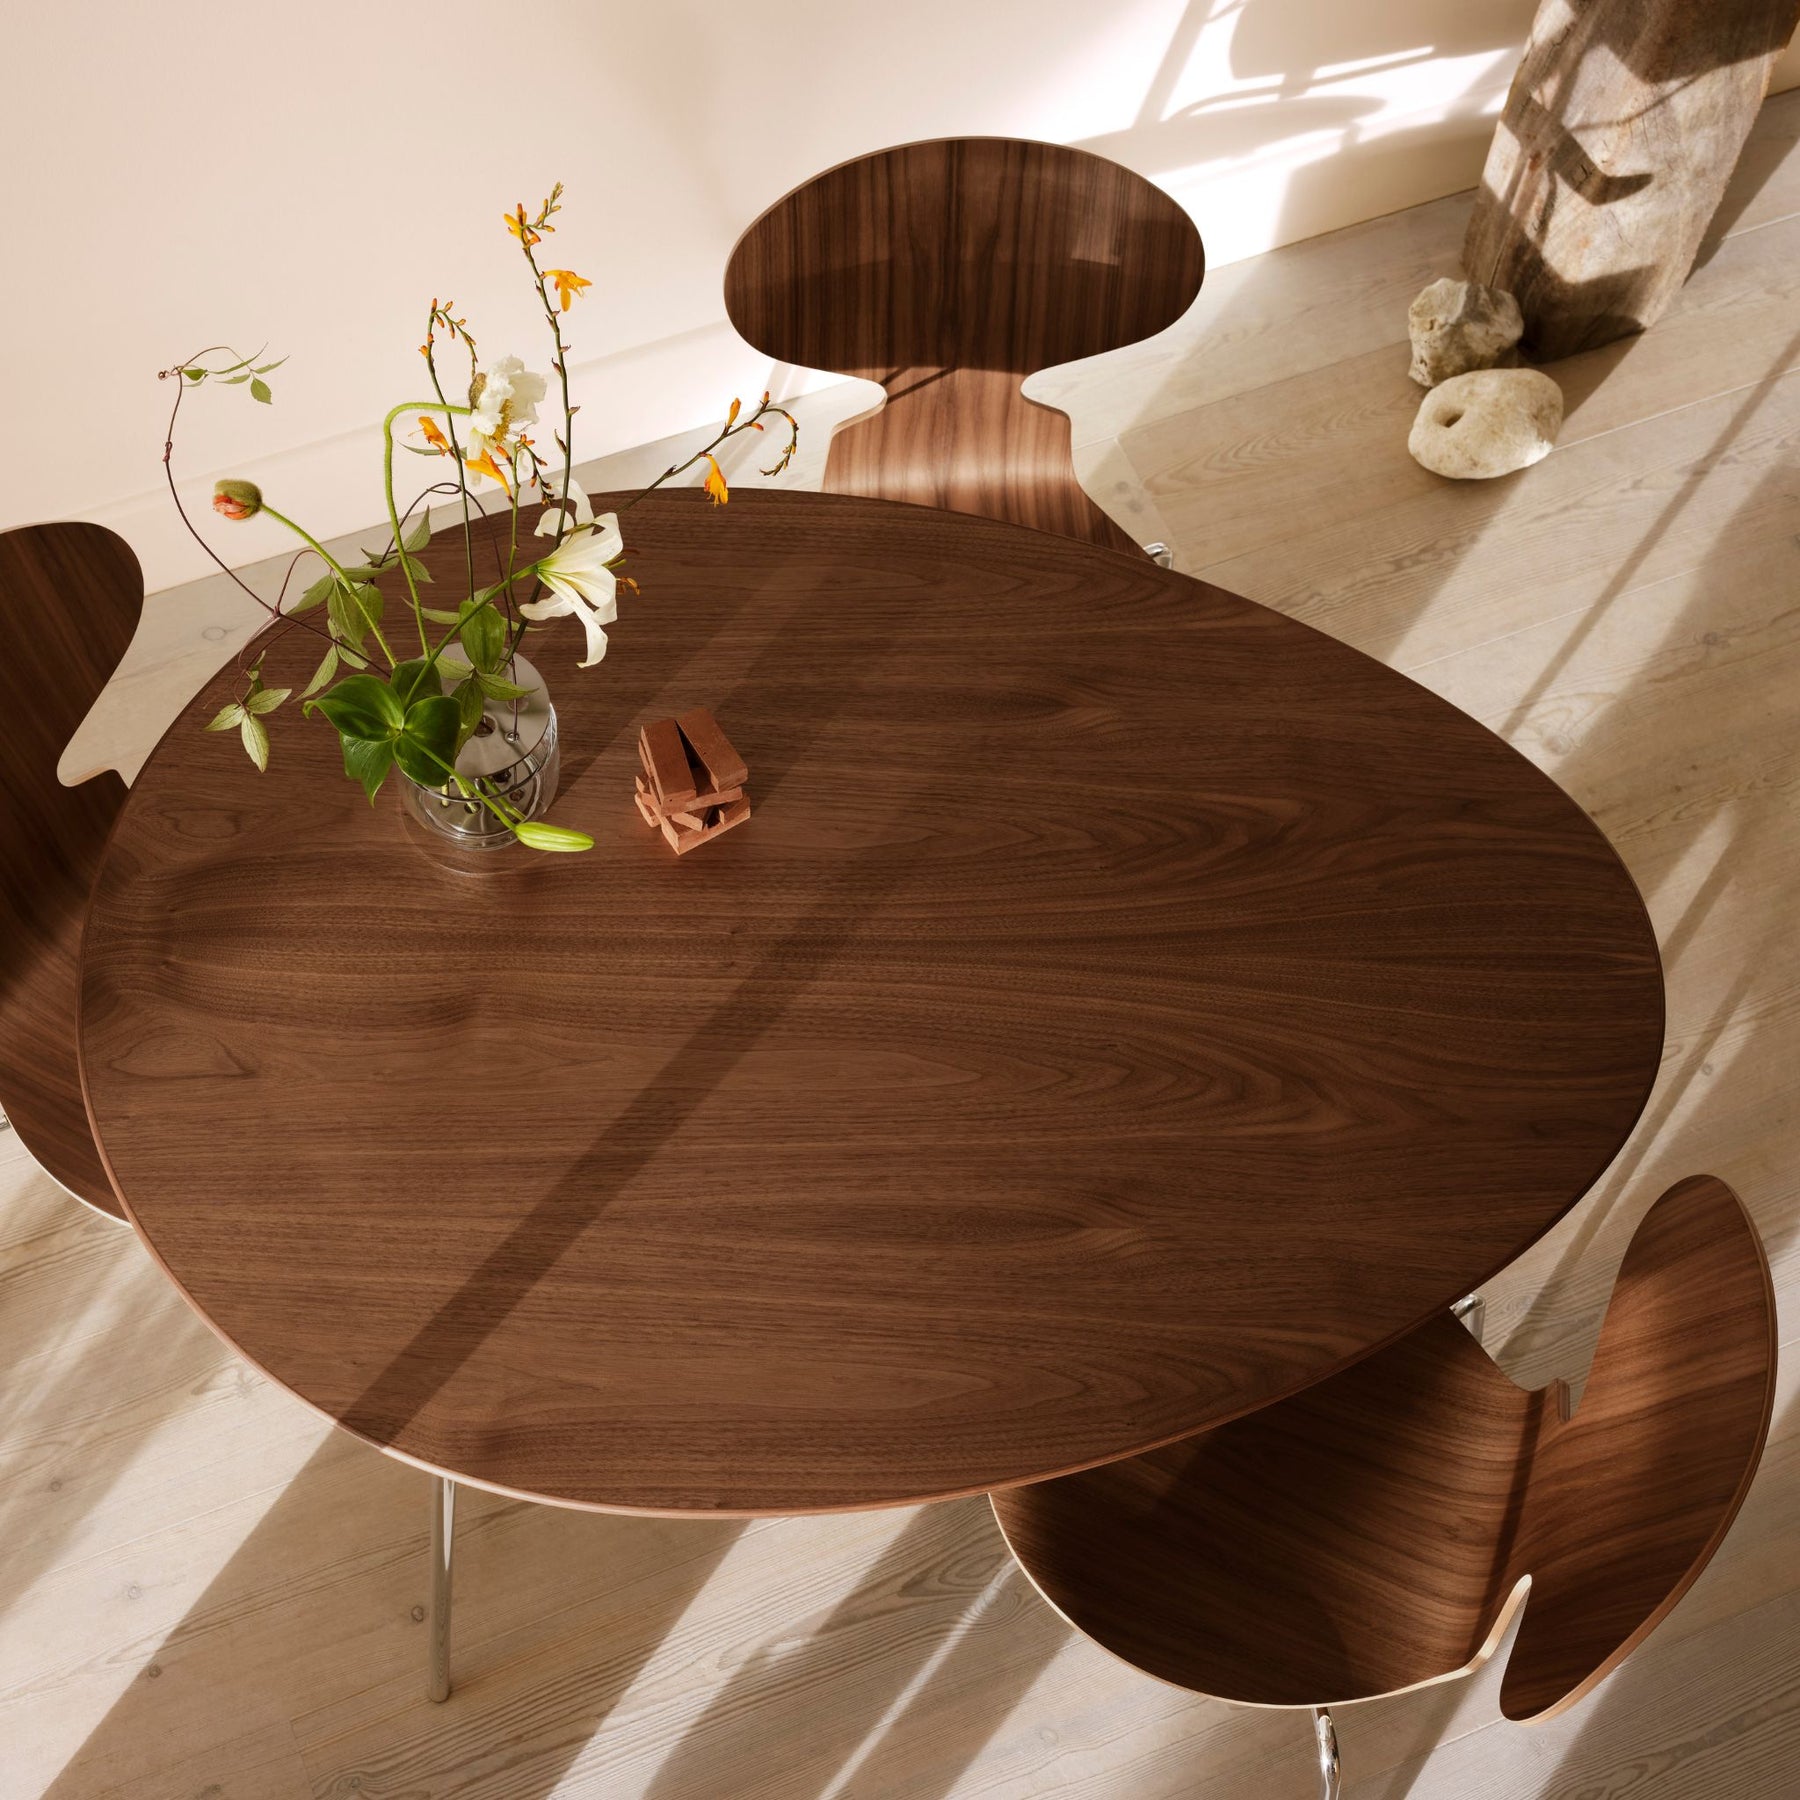 Fritz Hansen Egg Table and Ant Chairs in Walnut  by Arne Jacobsen in Kitchen with Ikebana Vase